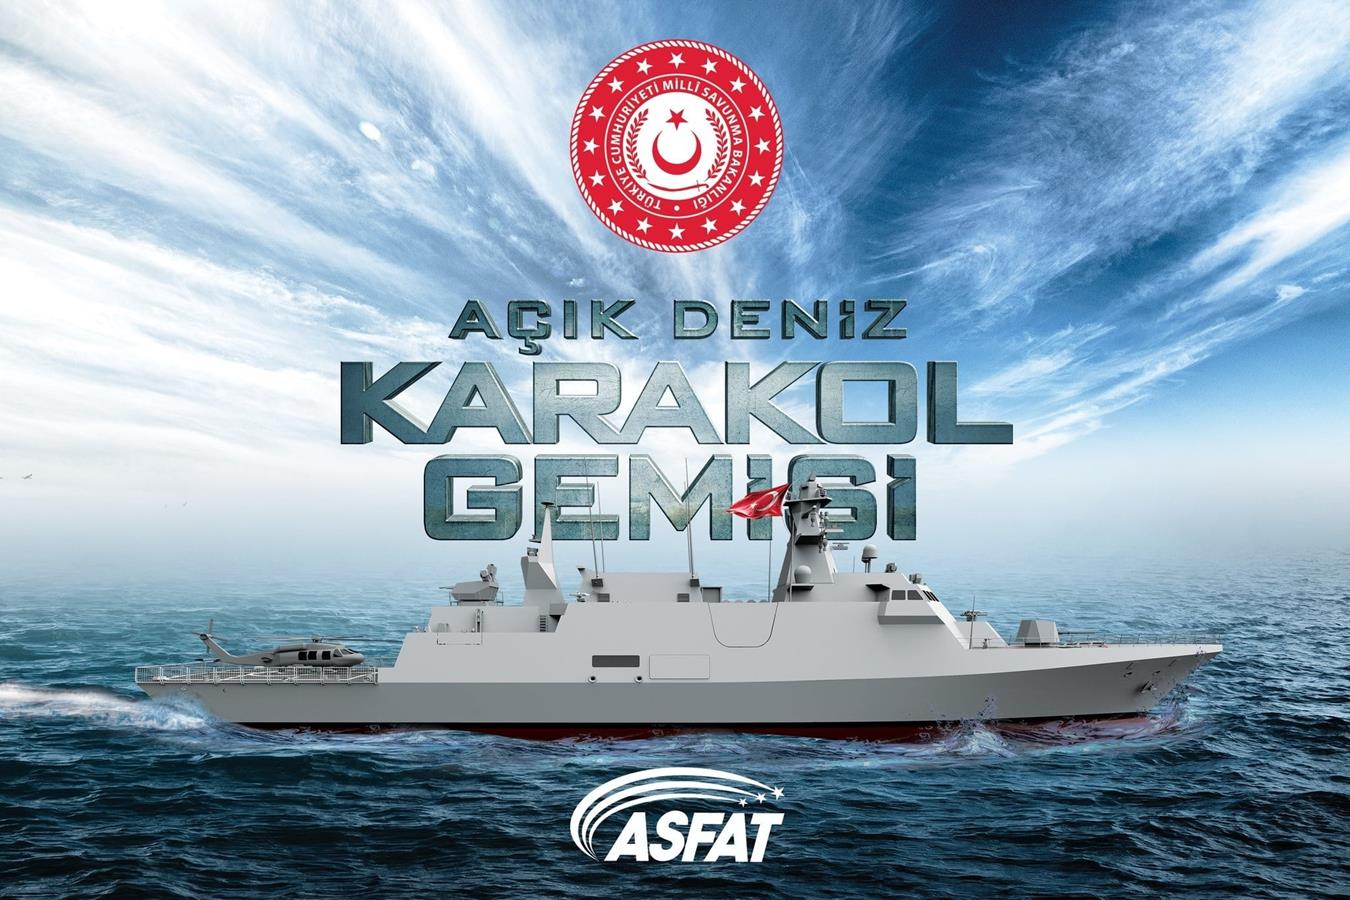 The construction of the Turkish Hisar-class patrol vessel is underway